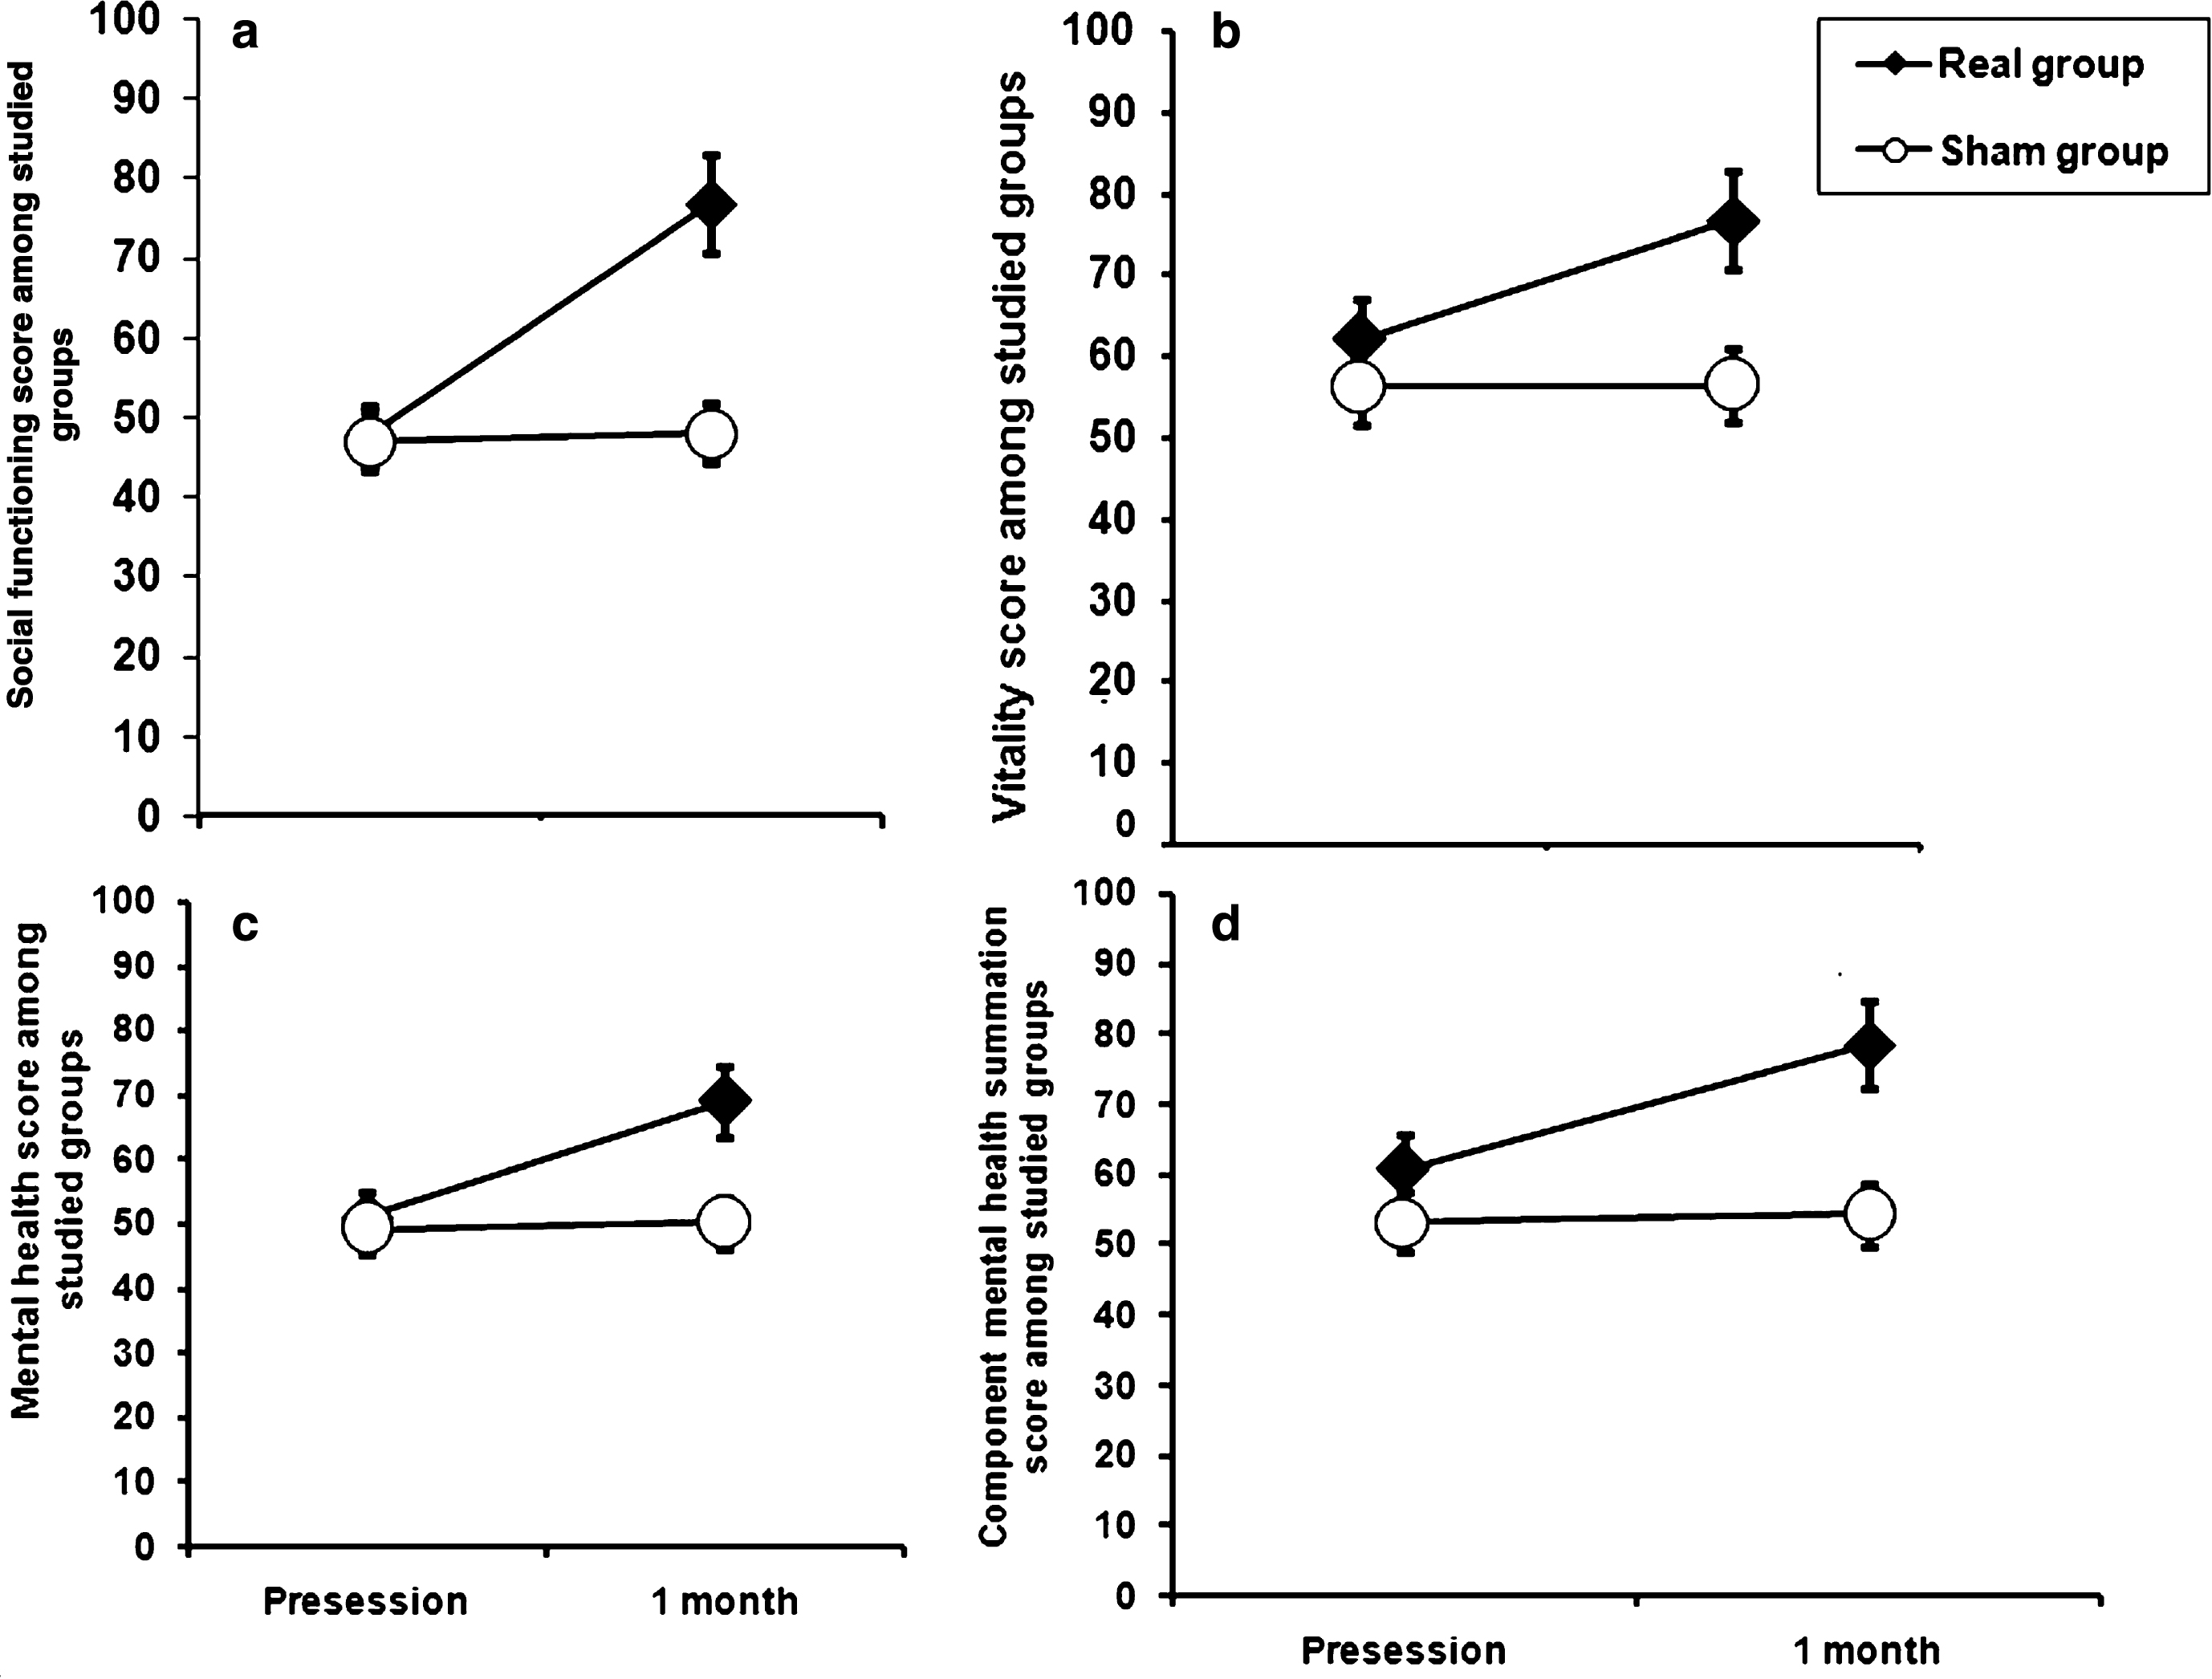 Shows changes in the score of Quality of lie (SF-36v2 Health survey) in patients with monosymptomatic nocturnal enuresis in the two studied groups before and one month after the end of stimulation. There were significant improvement in the score of Mental health domains including Social Functioning (SF), Vitality (VT), Mental Health (MH) and Component Mental Health Summation (CMHS) in real group versus sham group. However there was no significant difference between groups in different component of Physical health. Data expressed as mean ± Standard Errors (SE).